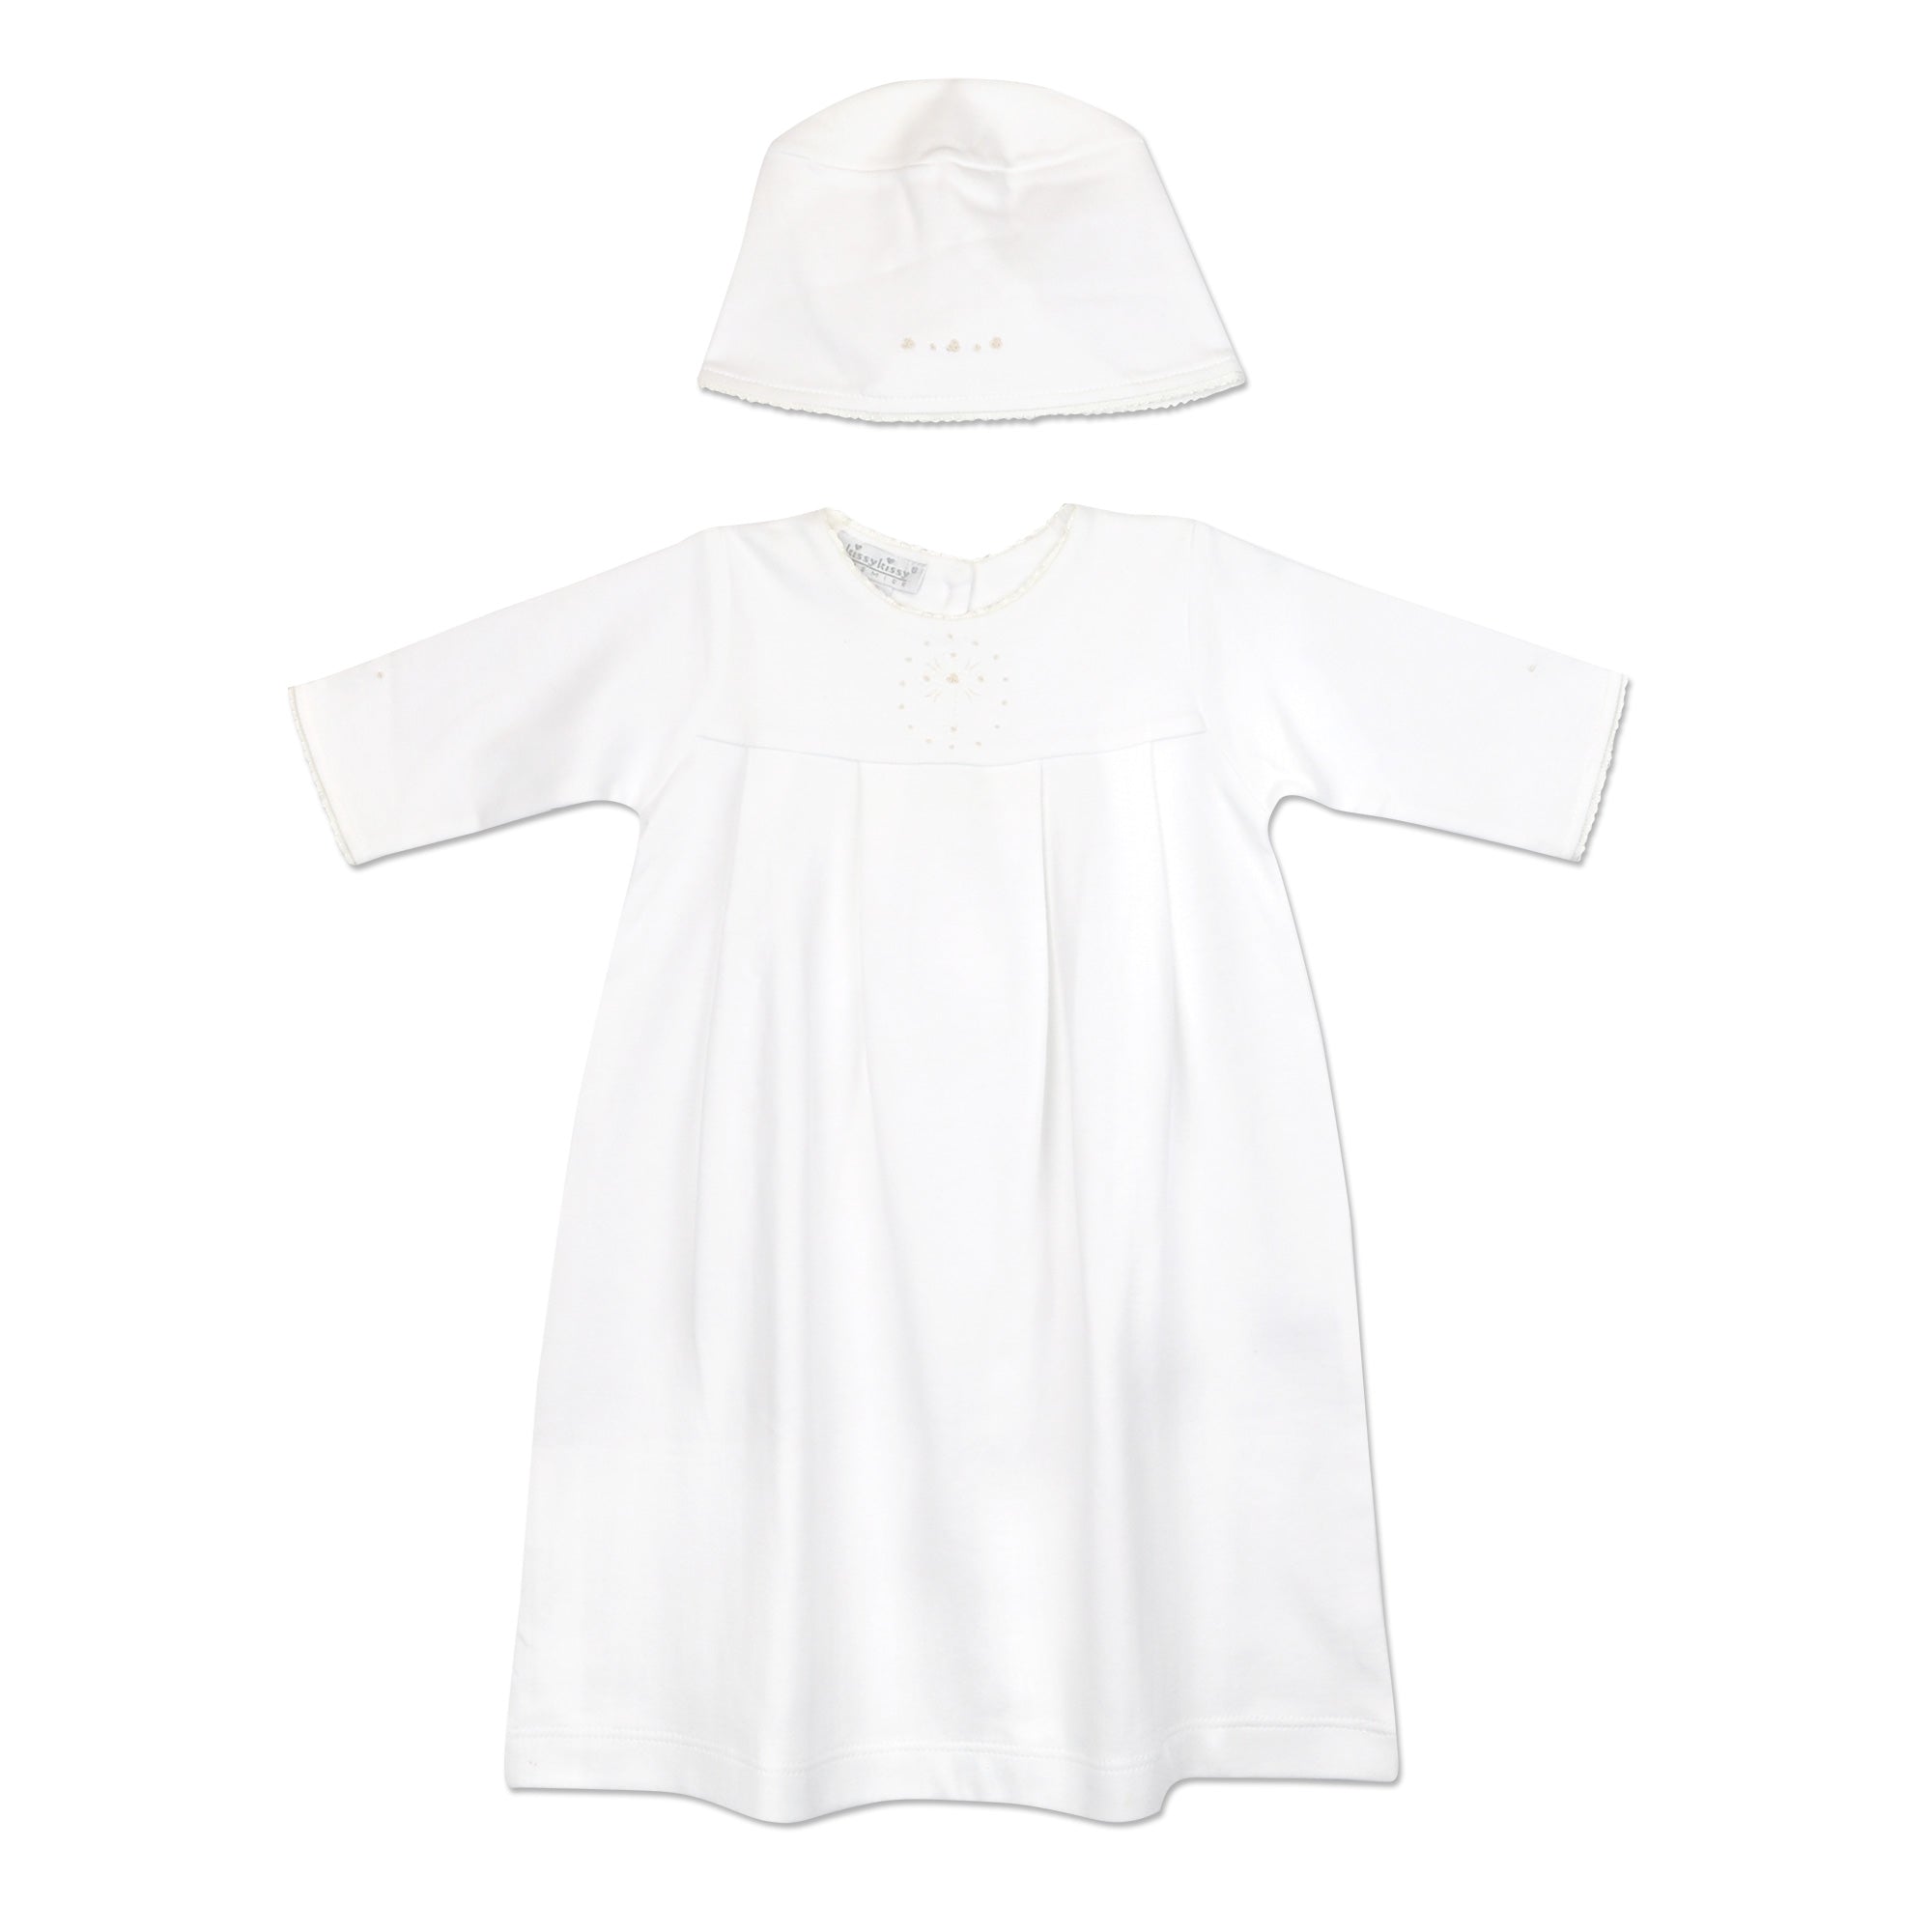 Christening Romper, Gown & Bonnet – By George Baby 732-939-1135